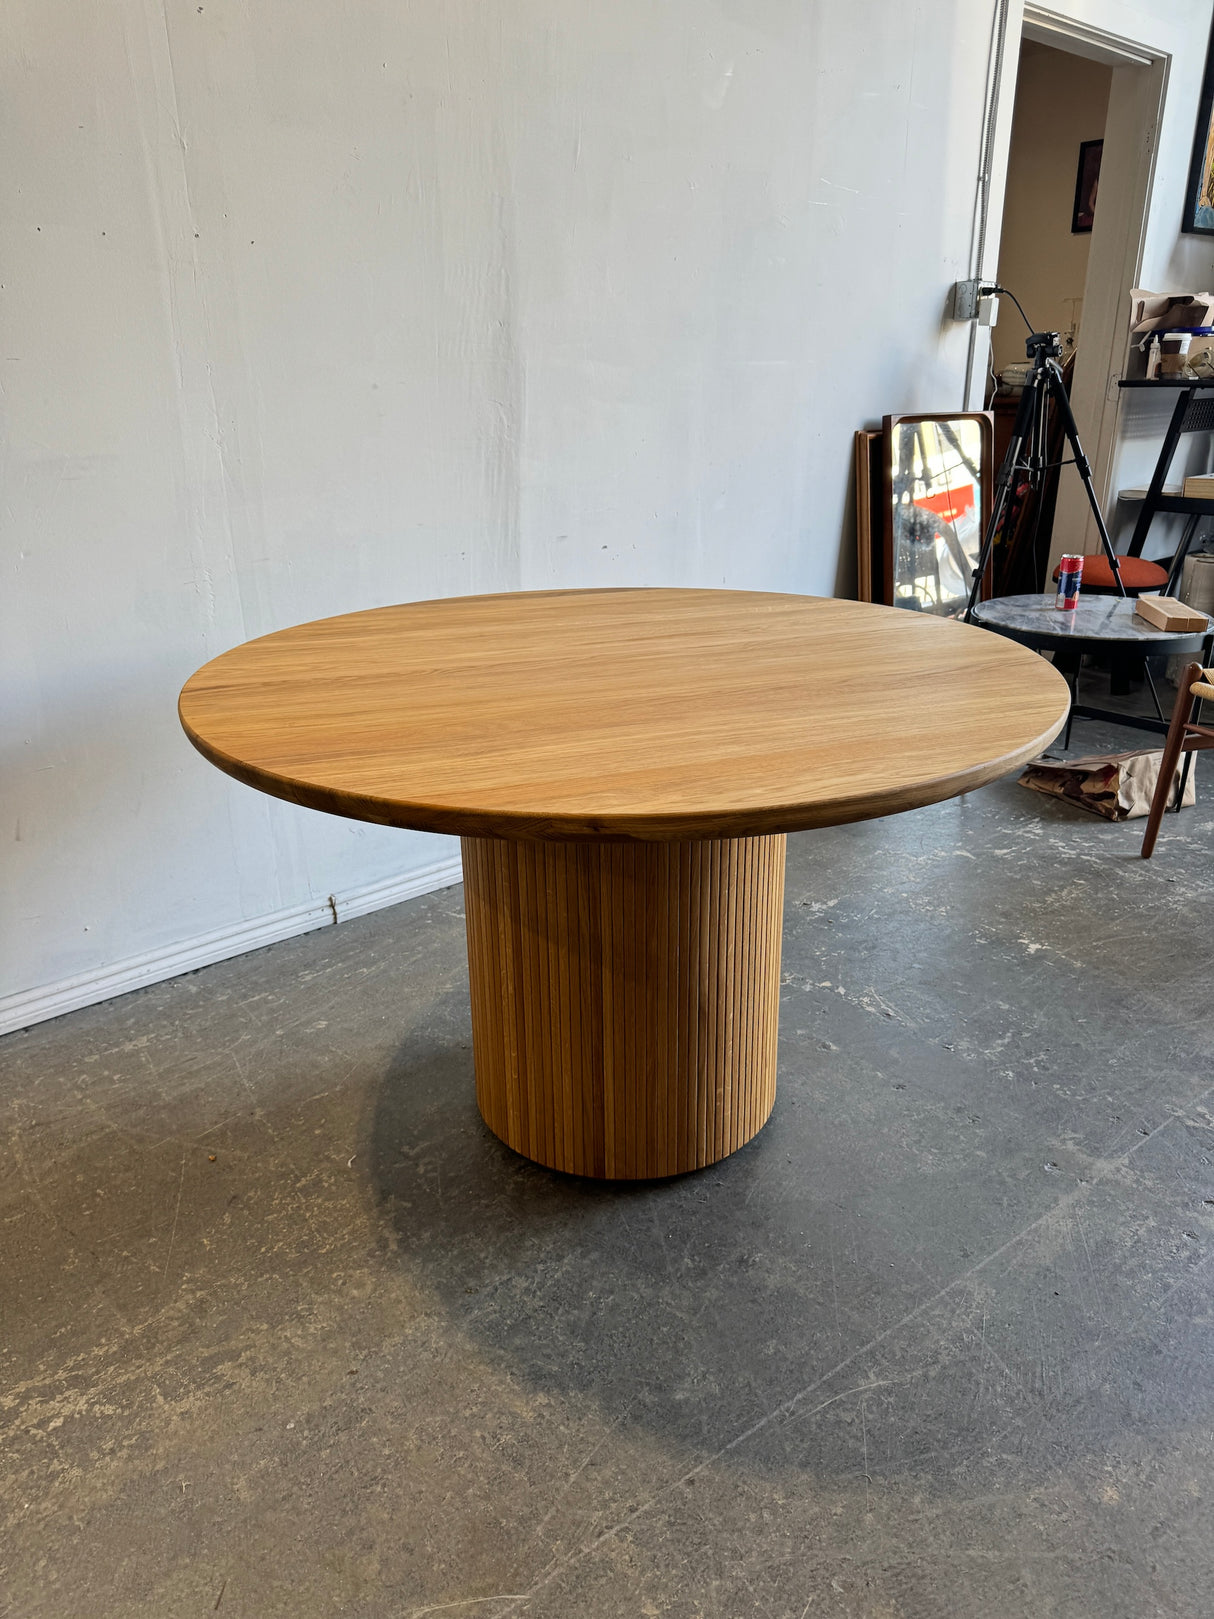 Brand New! Gubi Moon Dining Table (50% OFF)